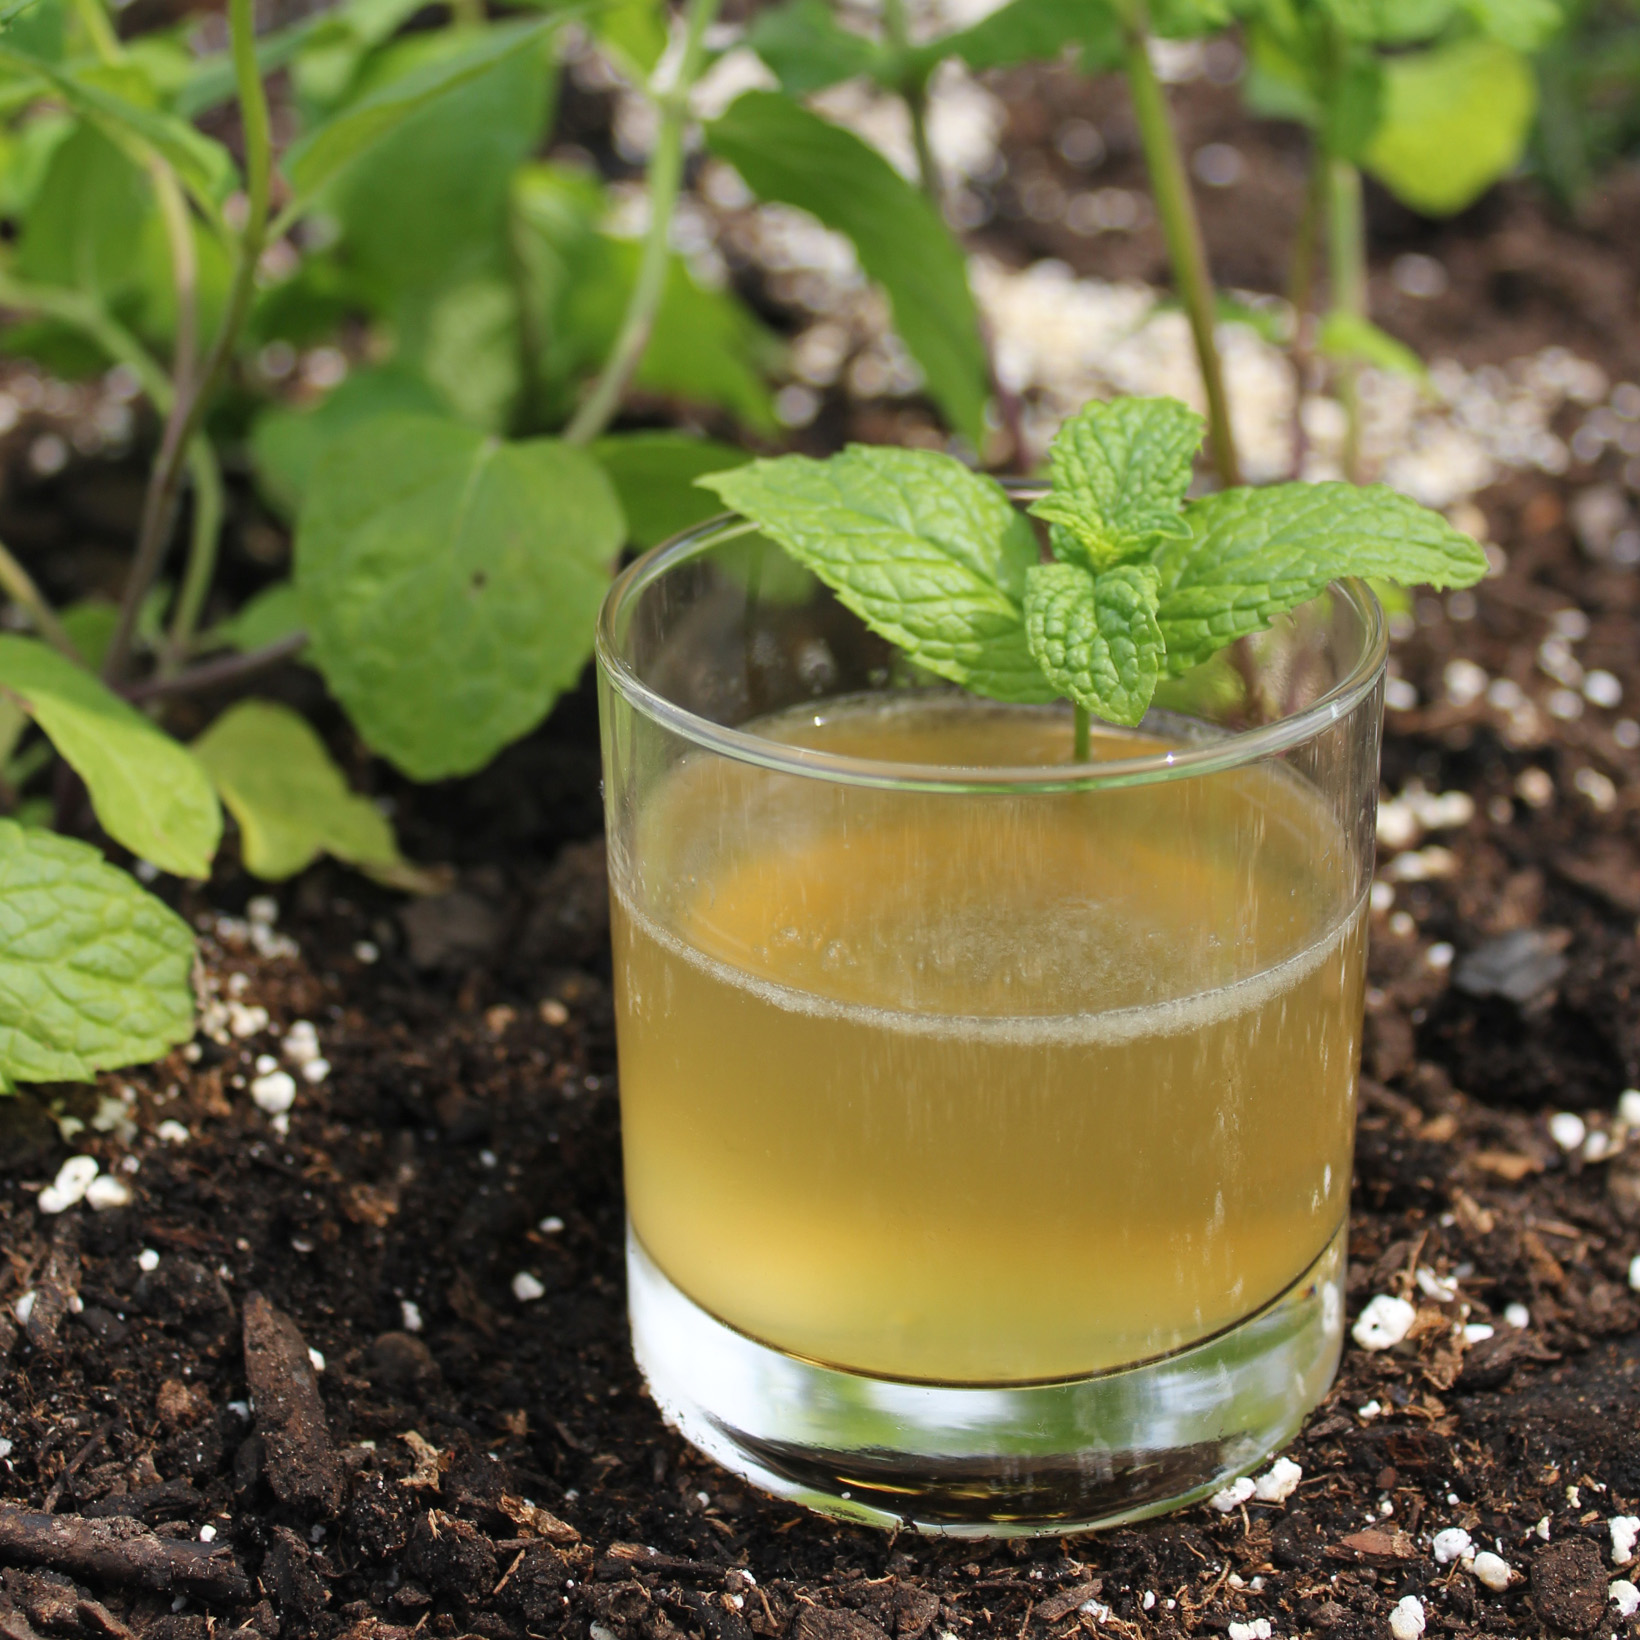 Peach Bourbon Cocktail garnished with mint sits in a garden bed